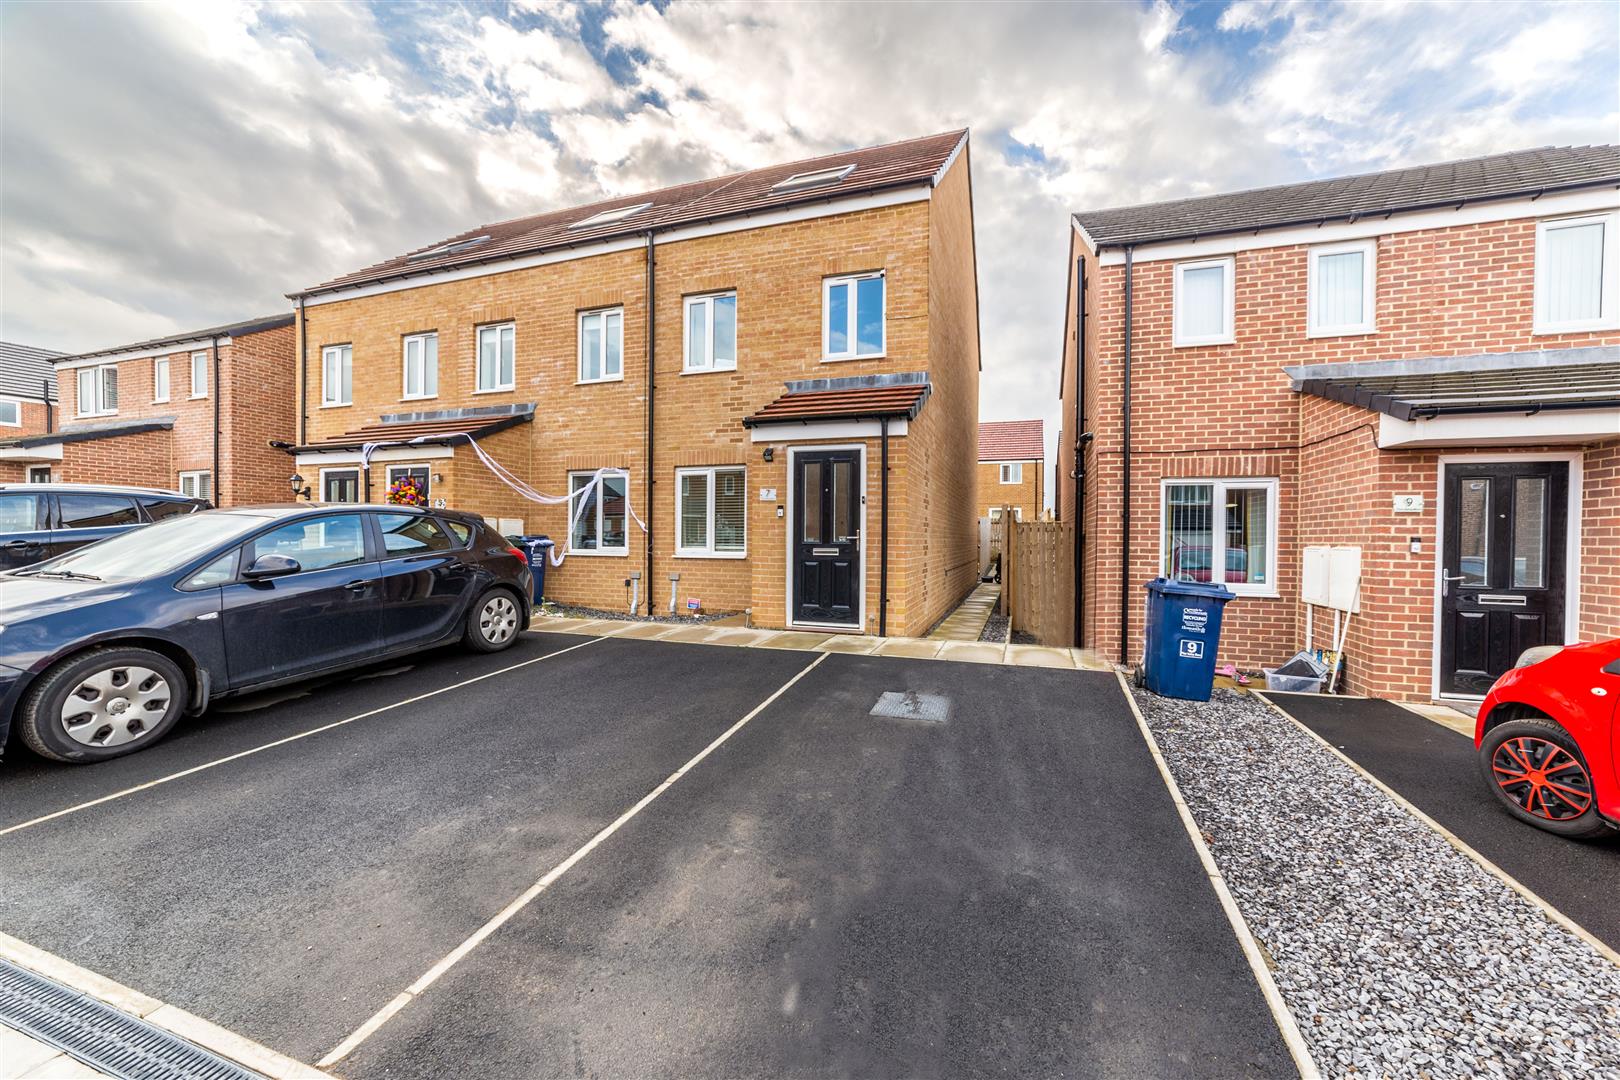 3 bed town house for sale in Pine Valley Mews, Newcastle Upon Tyne, NE13